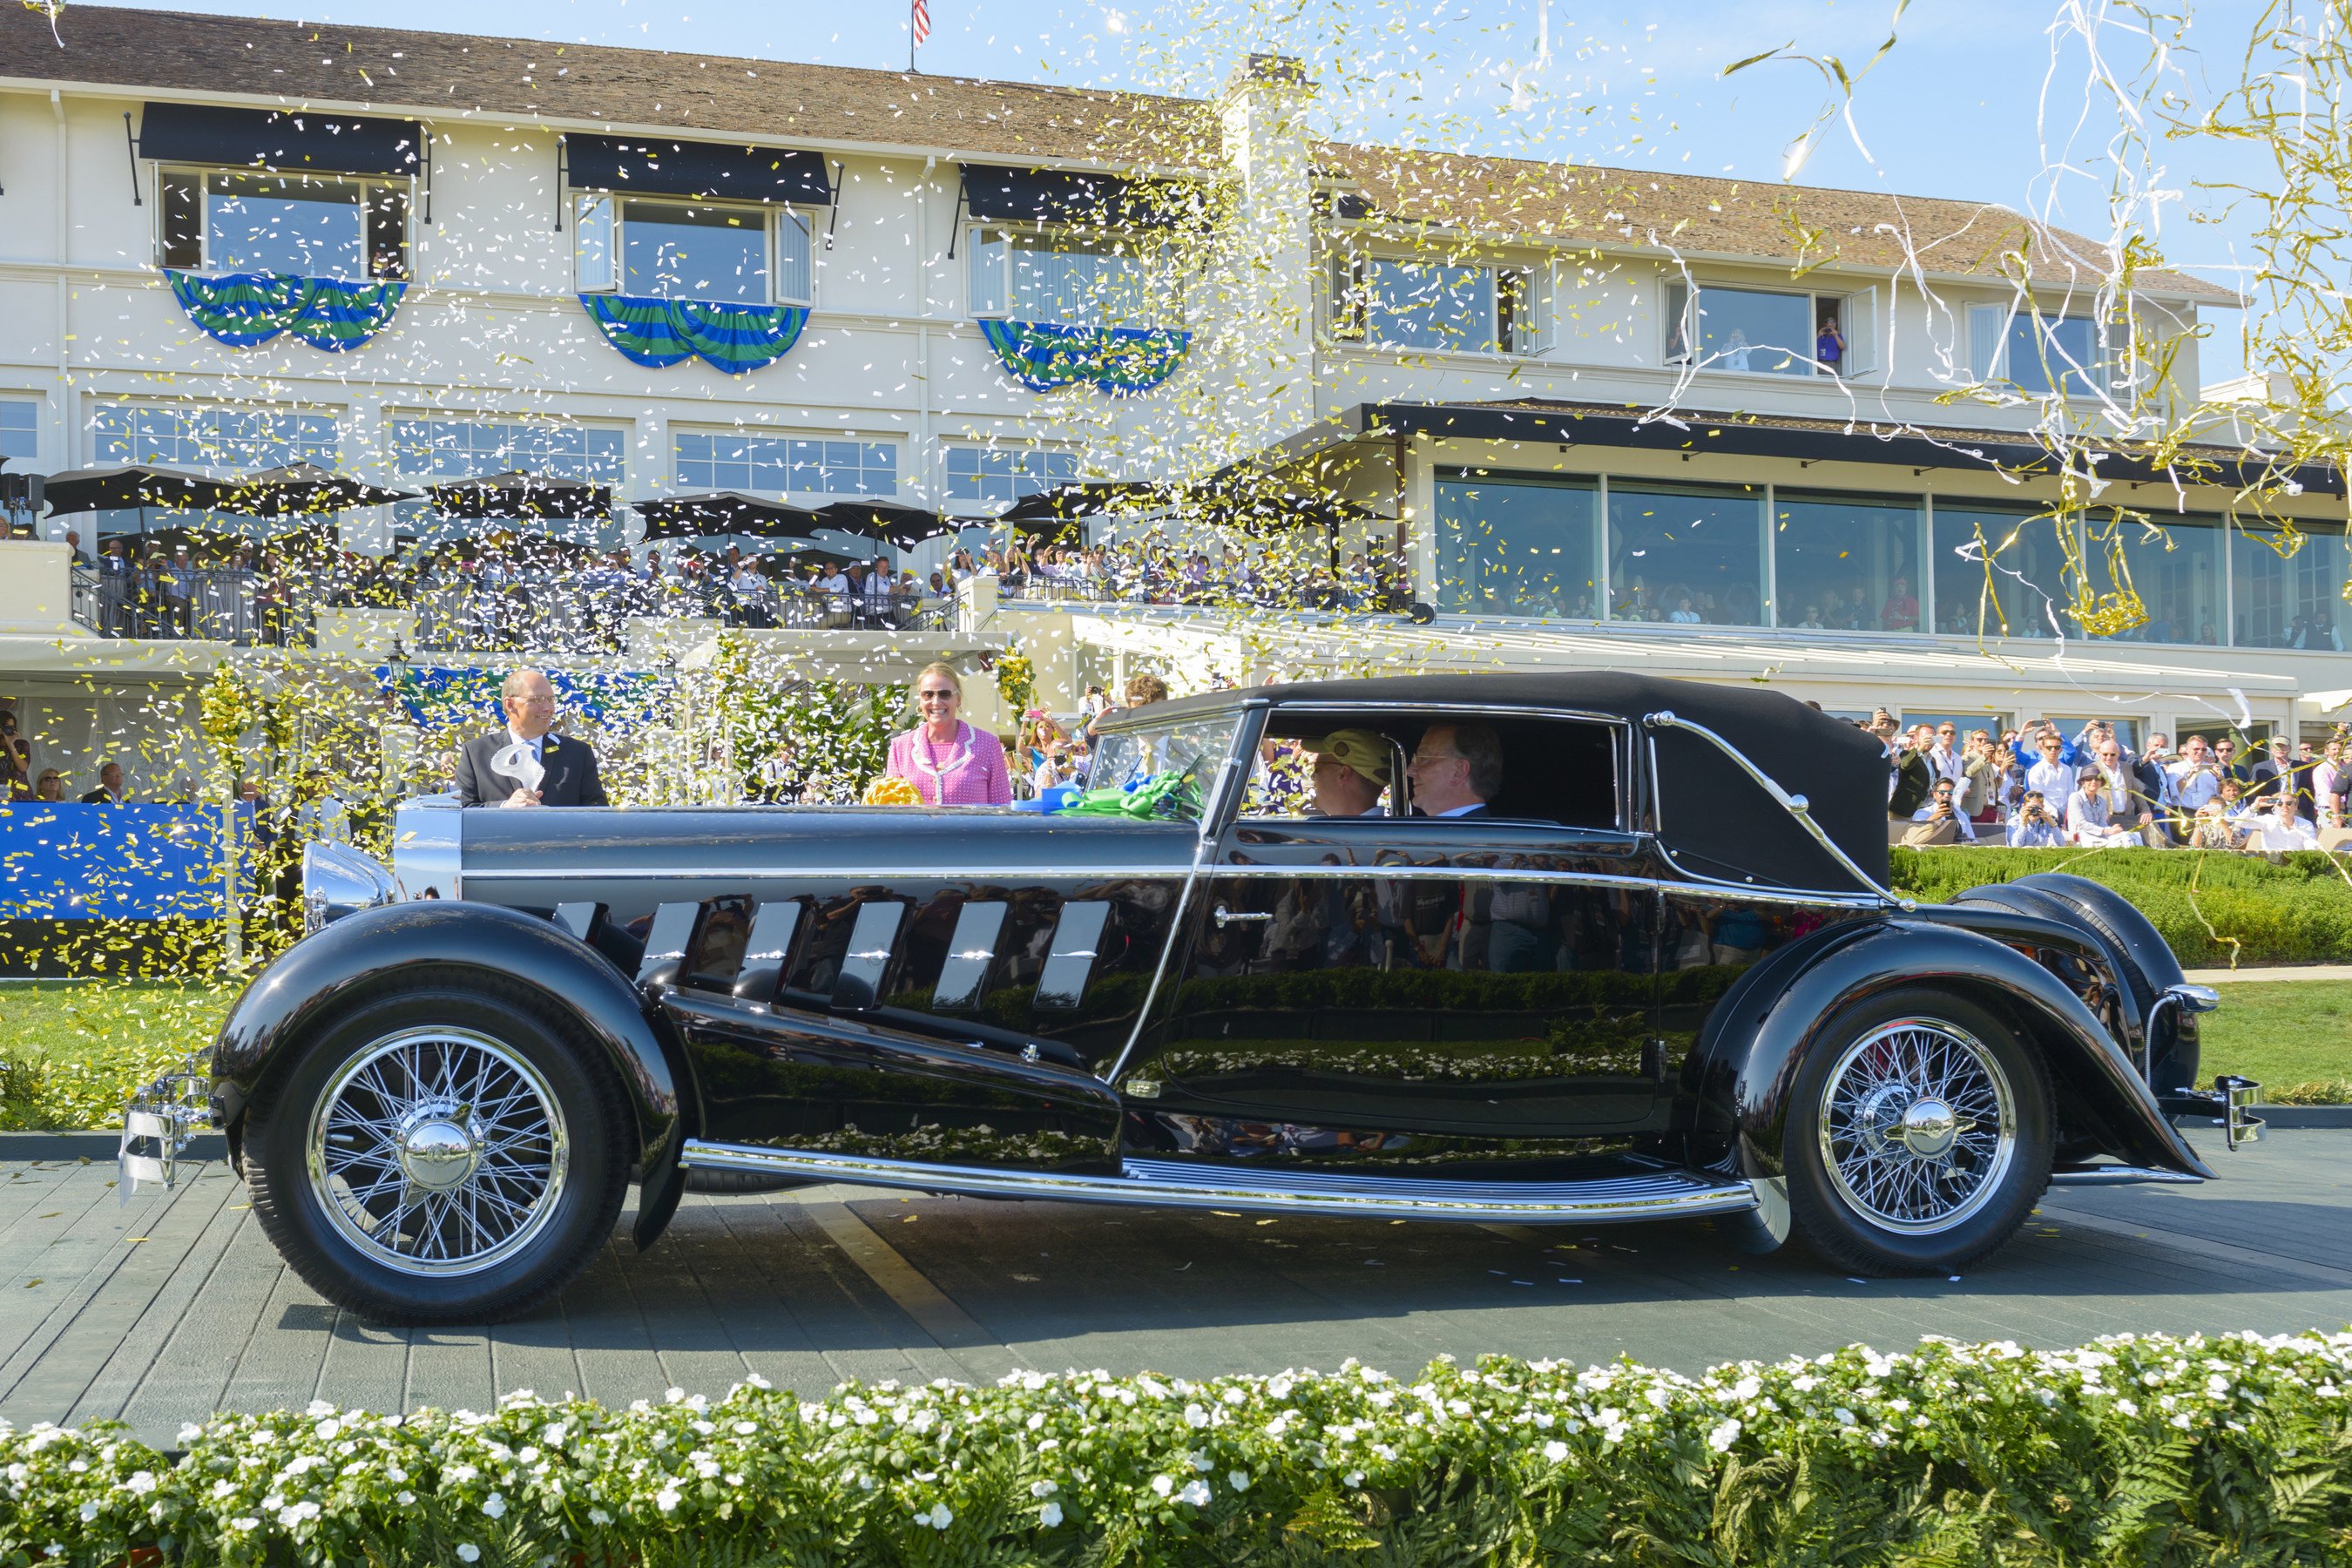 2015 Best of Show award goes to a 1924 Isotta Fraschini Tipo 8A F. Ramseier & Cie Worblaufern Cabriolet. Photo Copyright (C) Kimball Studios / Courtesy of Pebble Beach Concours d'Elegance